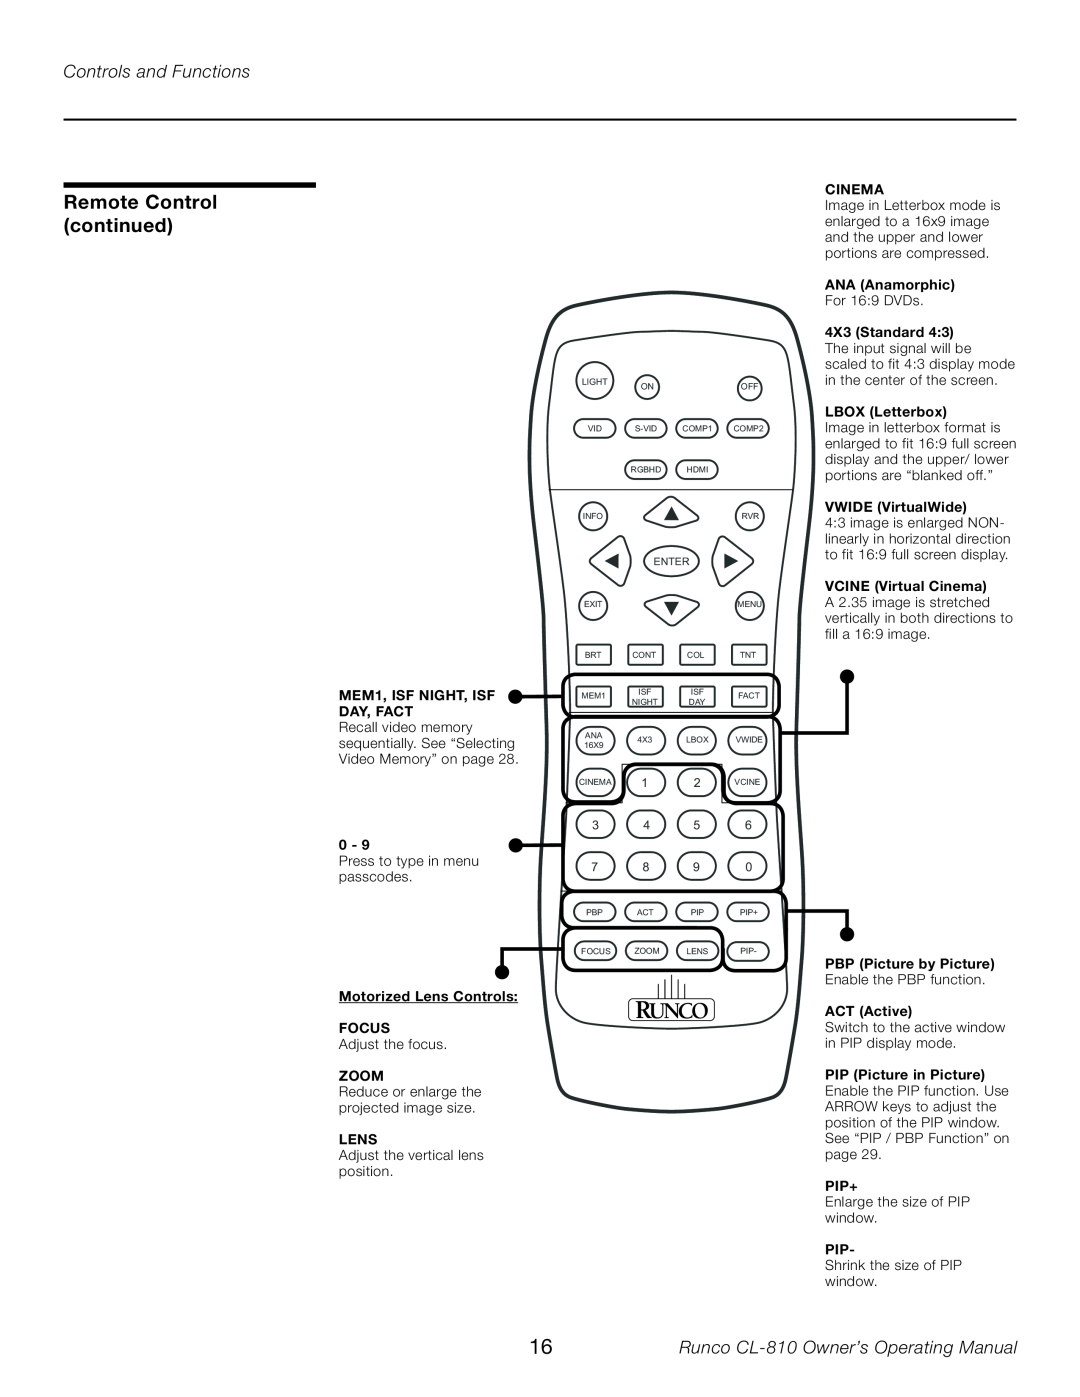 Runco manual Remote Control continued, Controls and Functions, Runco CL-810 Owner’s Operating Manual 